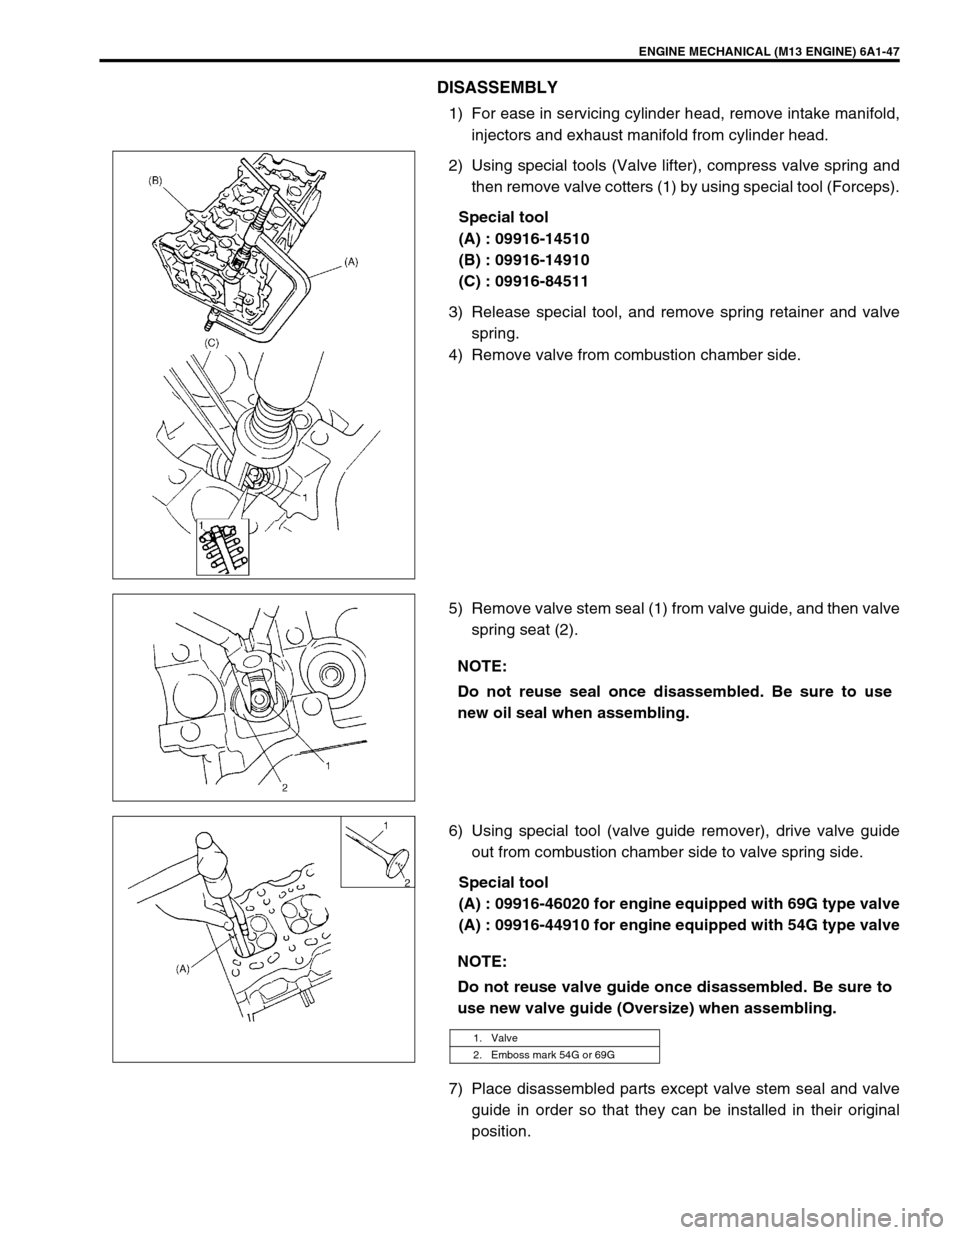 SUZUKI SWIFT 2000 1.G RG413 Service Owners Guide ENGINE MECHANICAL (M13 ENGINE) 6A1-47
DISASSEMBLY
1) For ease in servicing cylinder head, remove intake manifold,
injectors and exhaust manifold from cylinder head.
2) Using special tools (Valve lifte